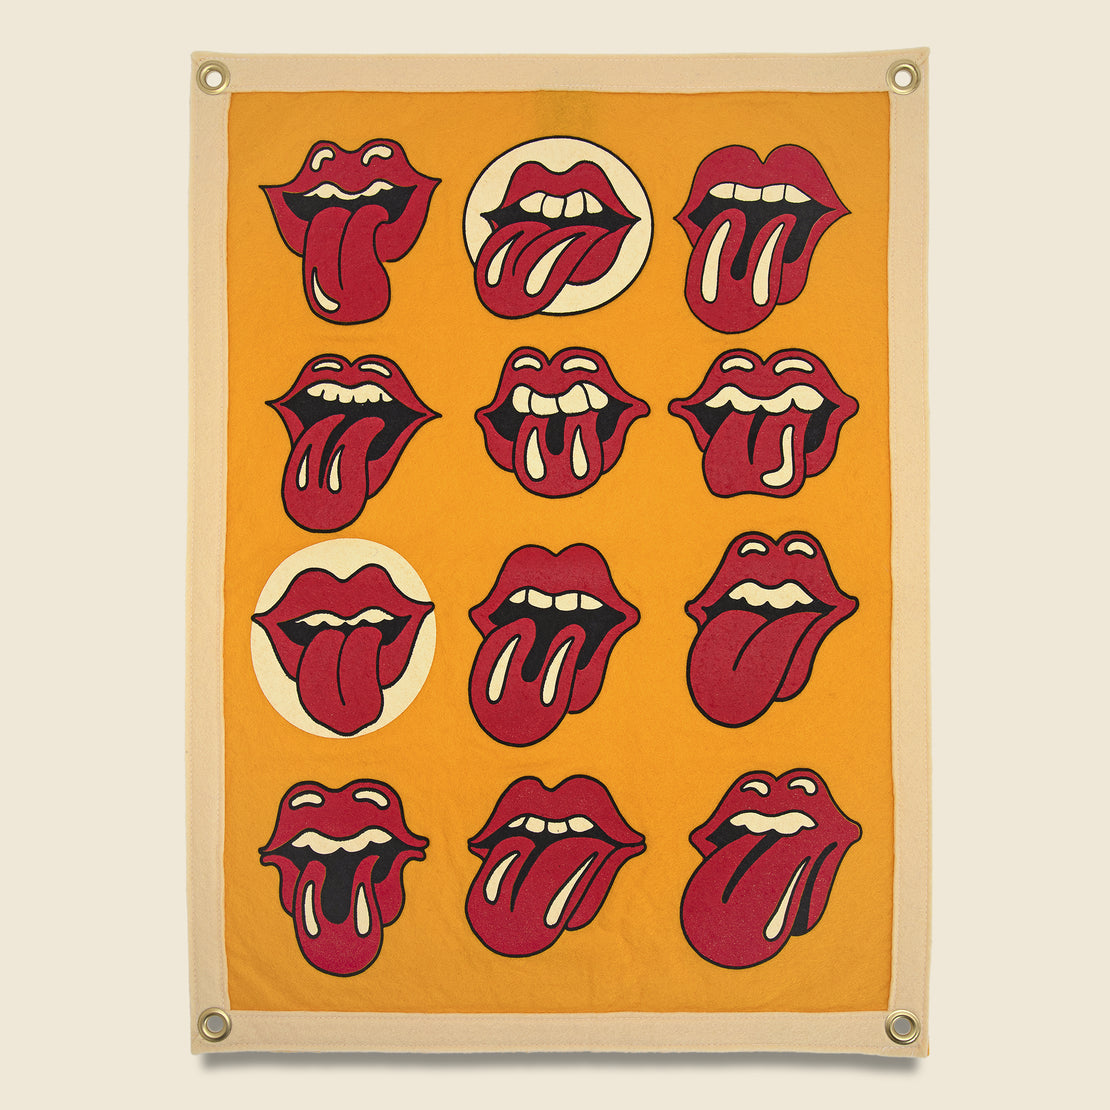 Oxford Pennant Rolling Stones Lips Banner